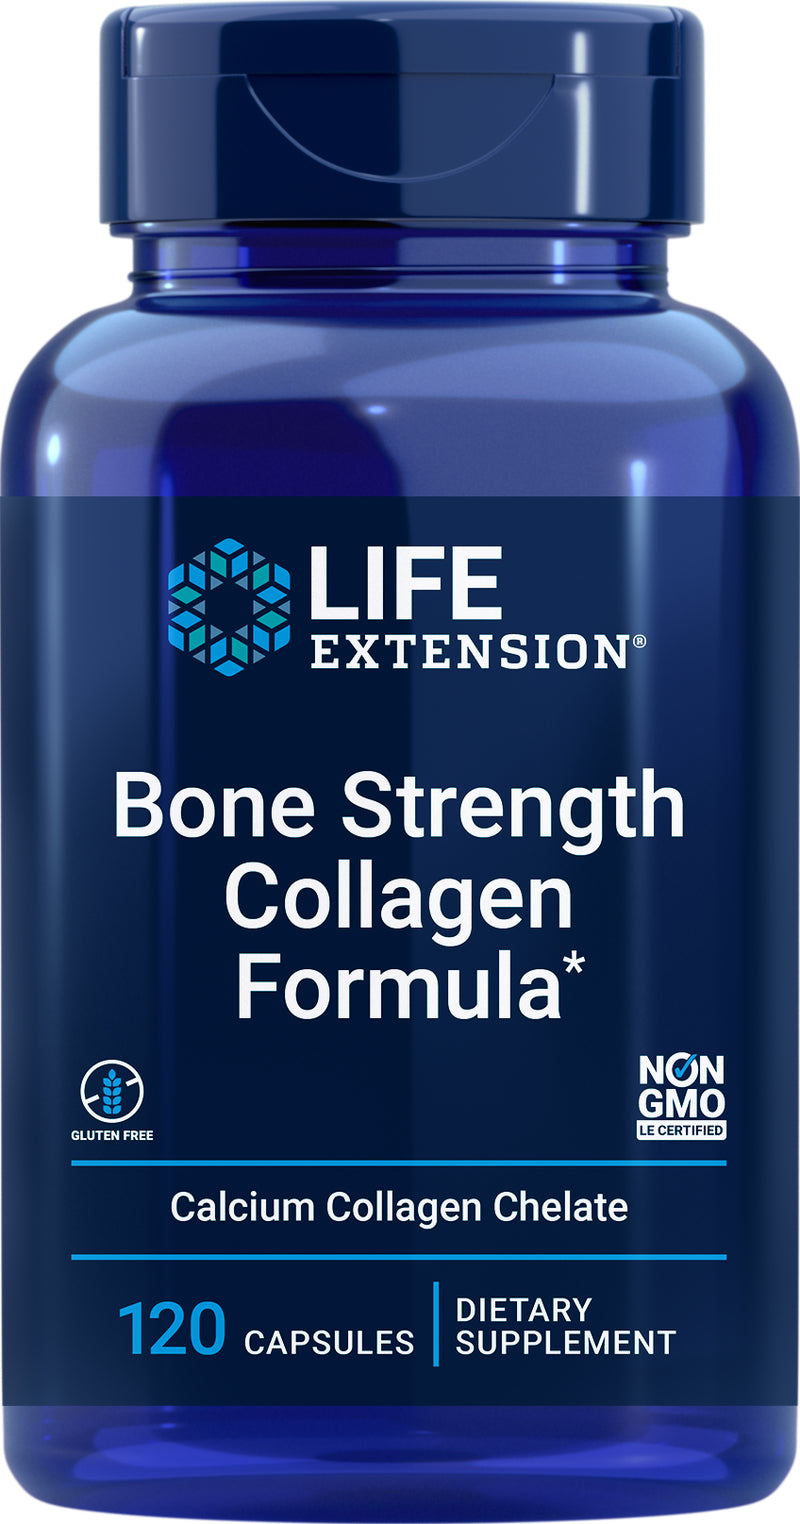 Bone Strength Collagen Formula 120 capsules by Life Extension